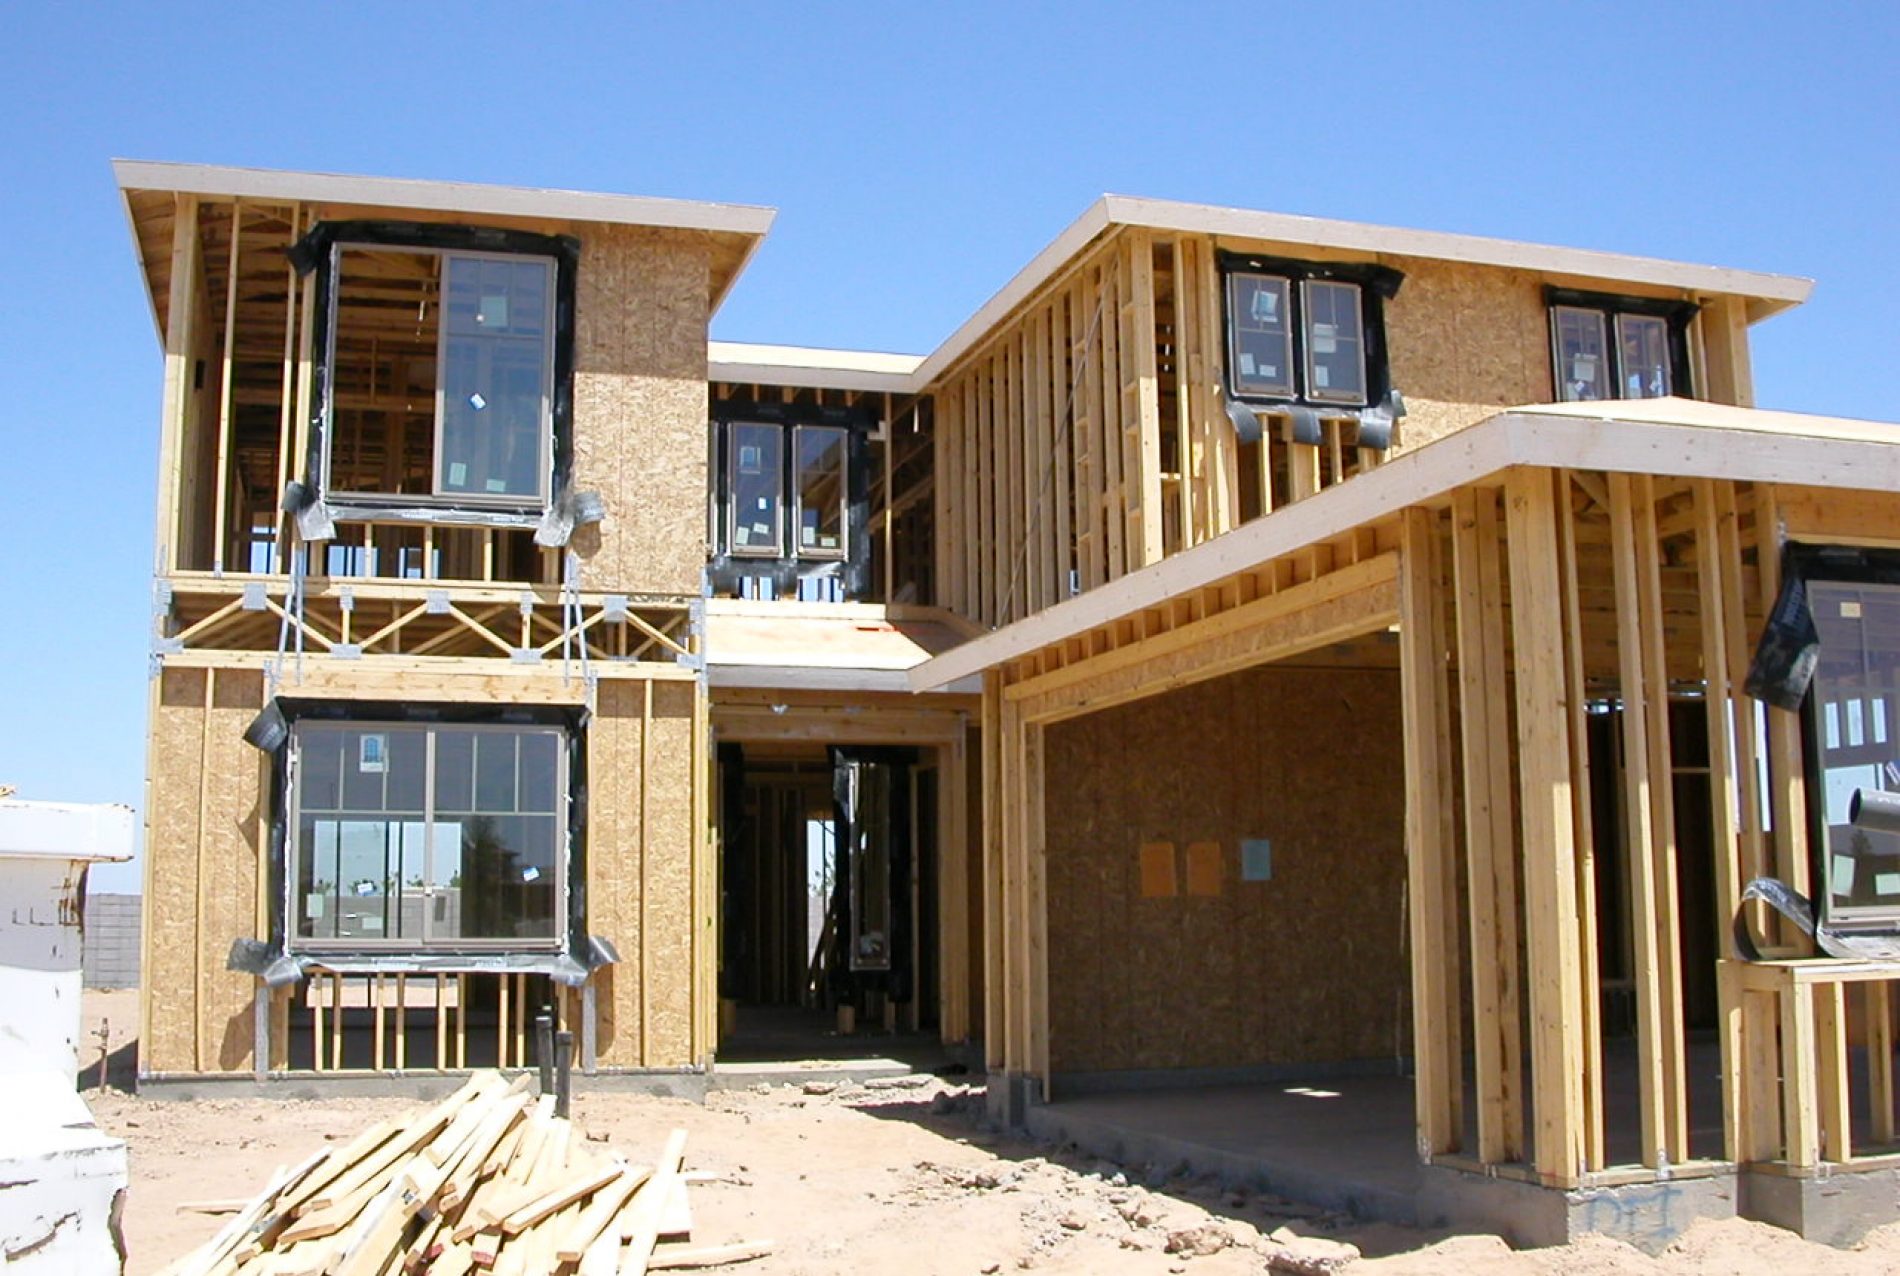 Which Public Homebuilders are Best Positioned for 2015?